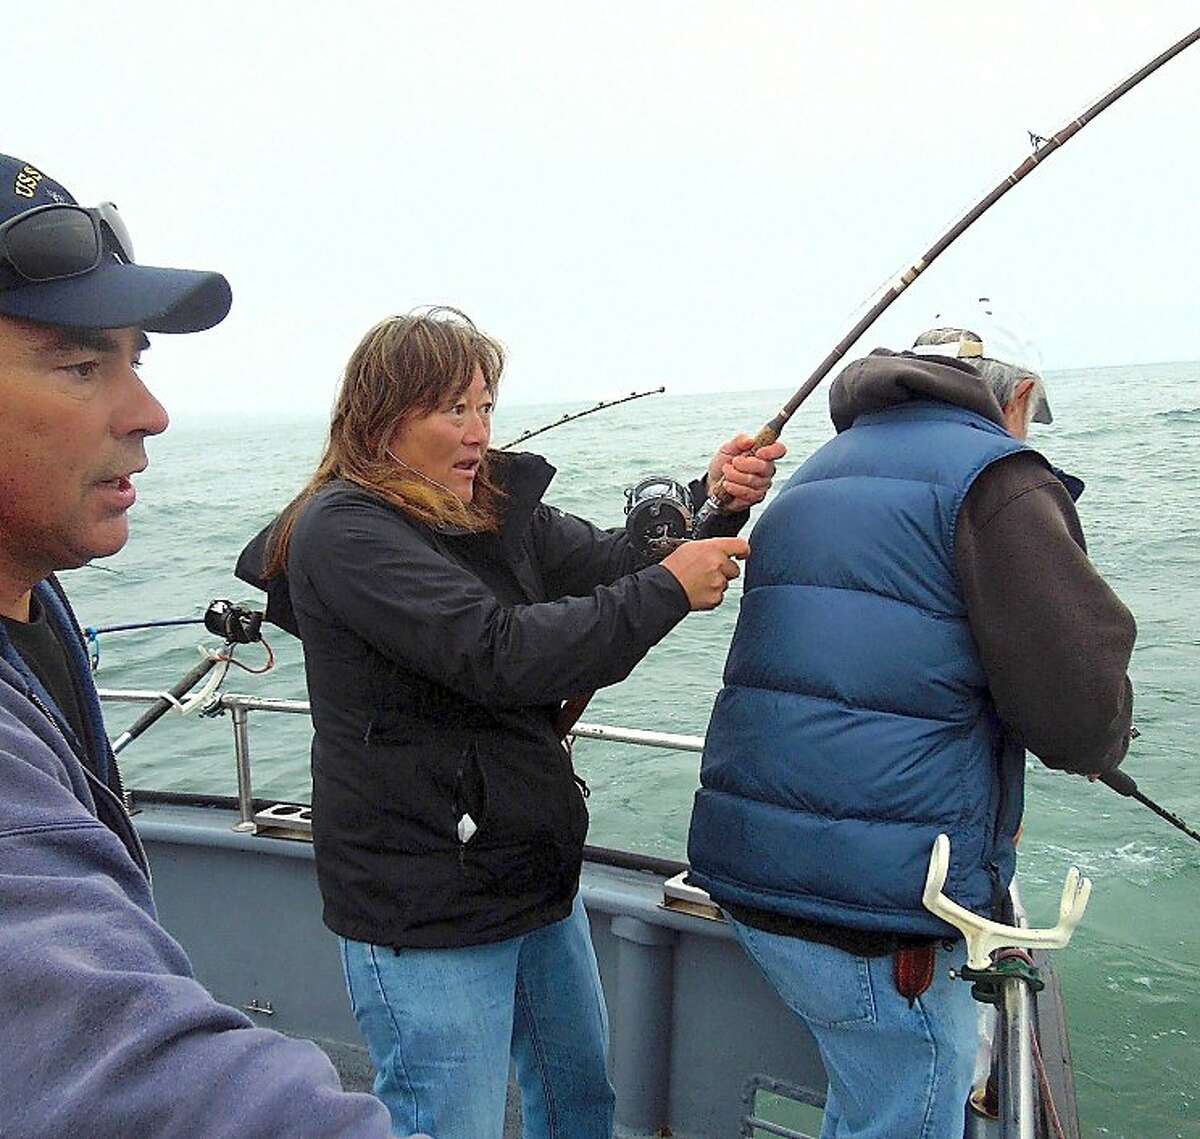 Jenna Tognoni battles a salmon as John Dresser, a deckhand and part-time captain of the Wacky Jacky out of San Francisco, looks on.